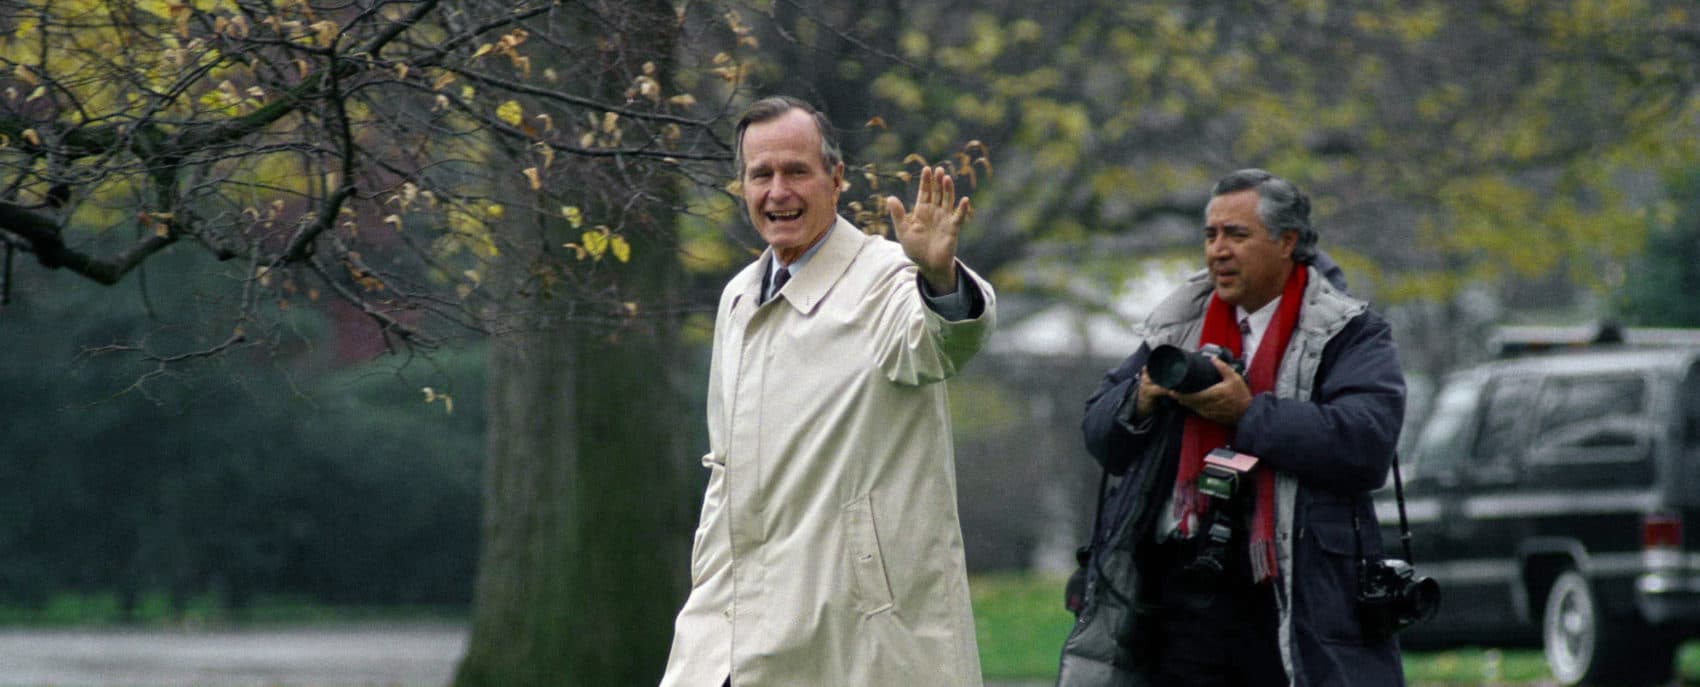 White House photographer David Valdez follows President George H.W. Bush as he departs the White House, Wednesday, Nov. 25, 1992 in Washington for Kennebunkport, Maine, for the Thanksgiving holiday. (Barry Thumma/AP)